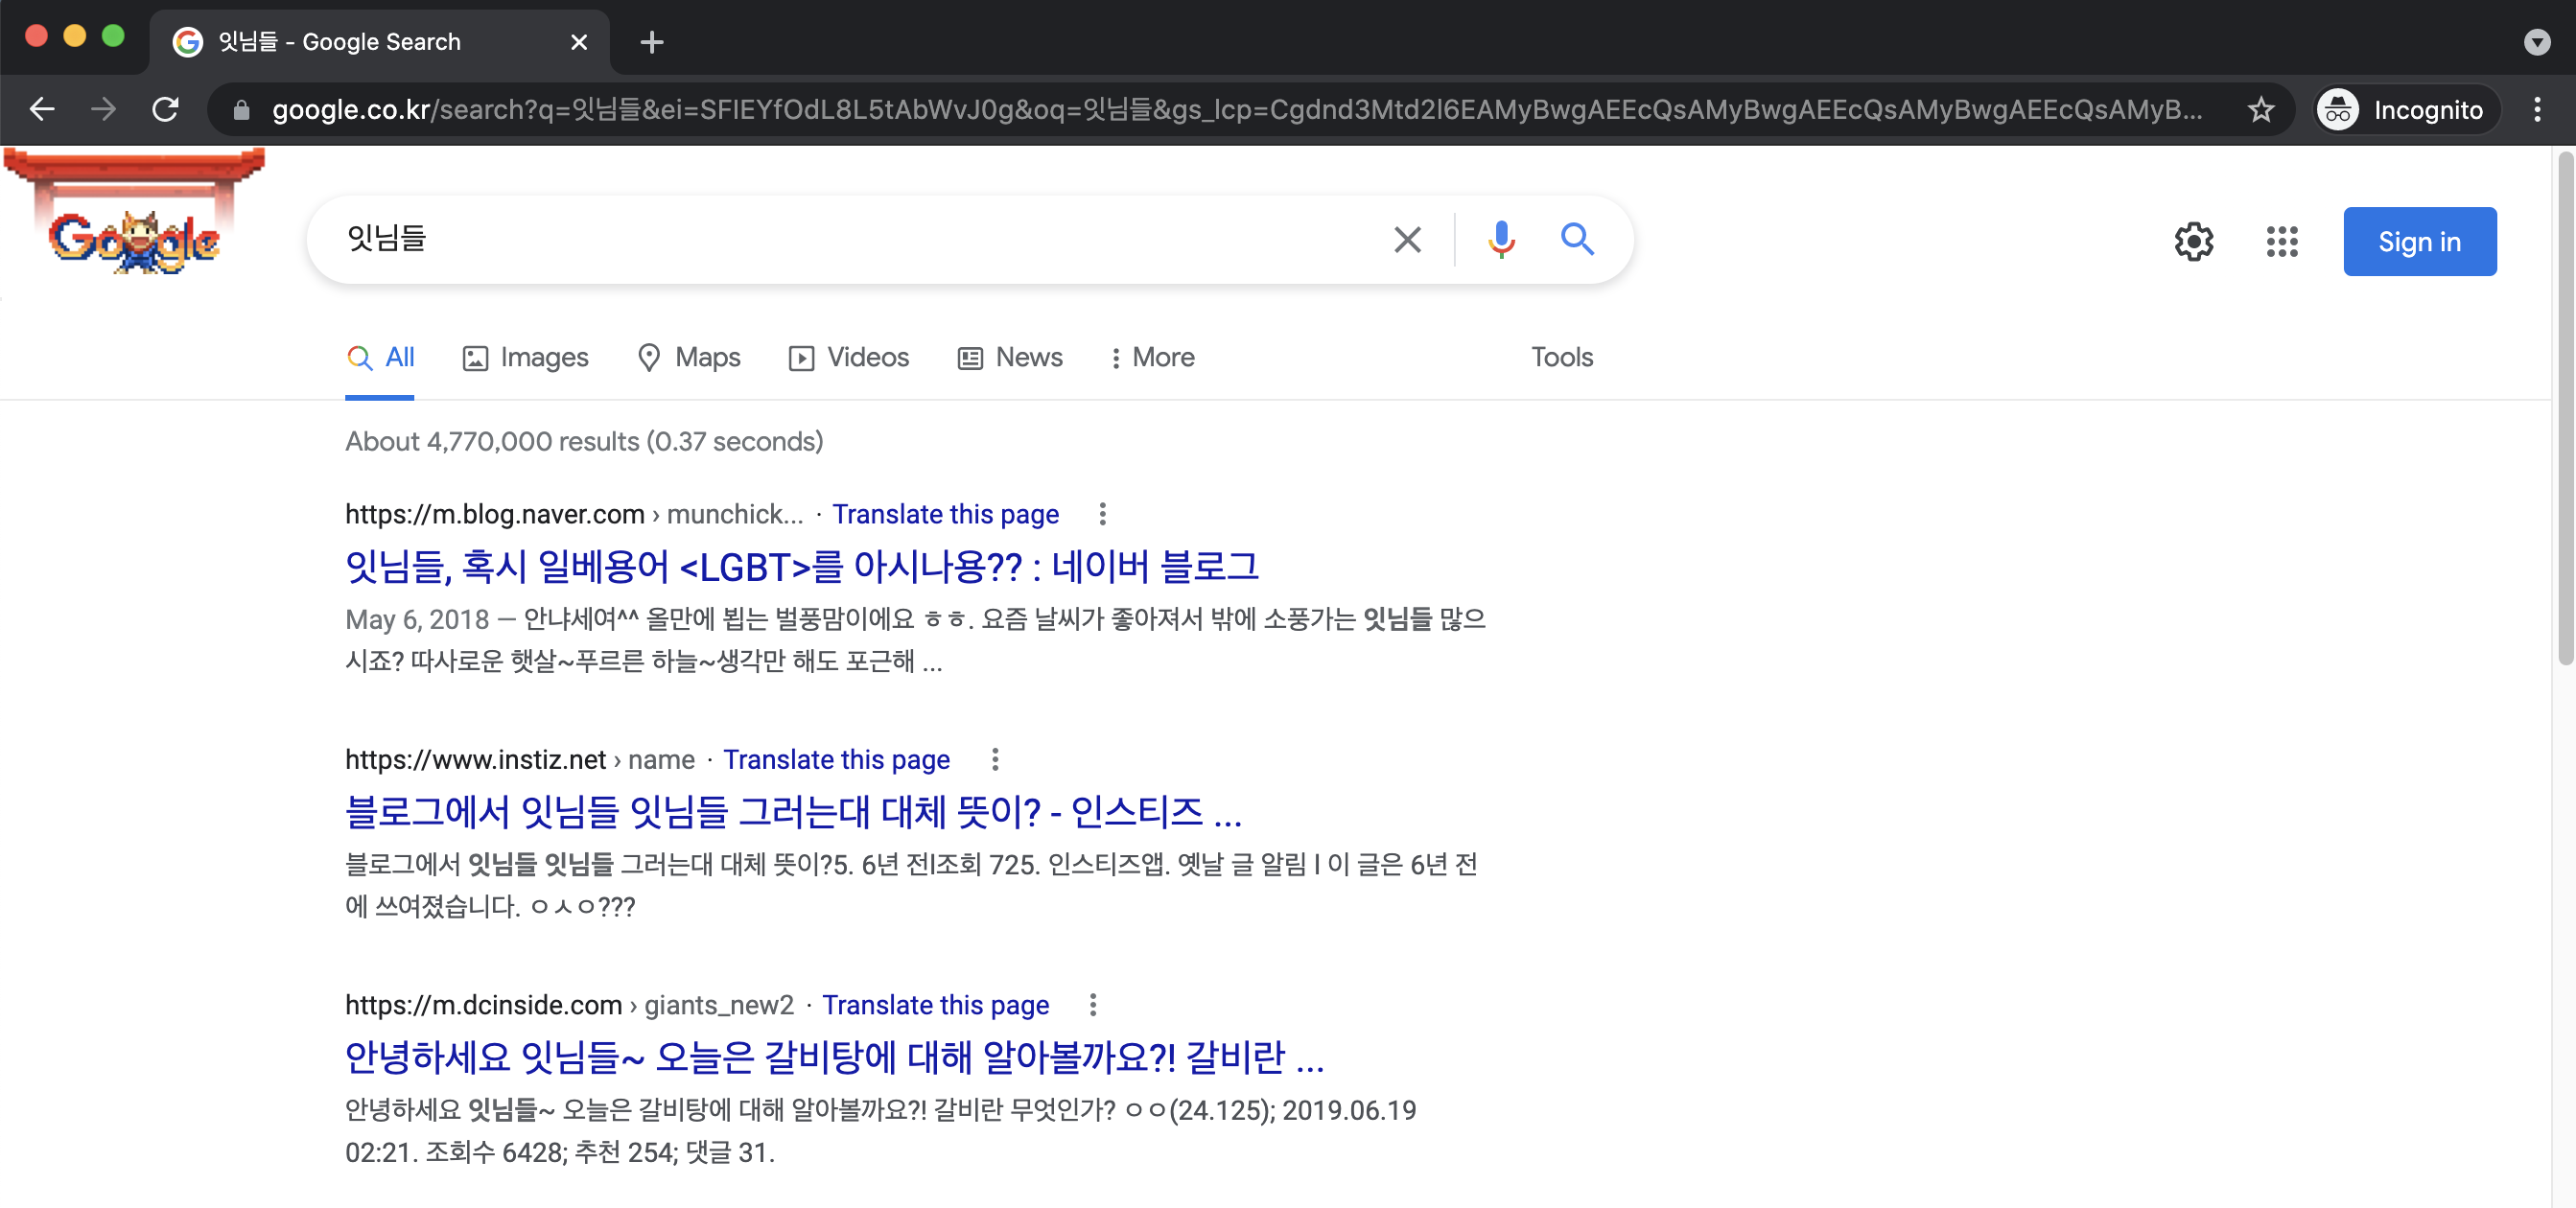 Google search result page with a query 잇님들 on July 31, 2021